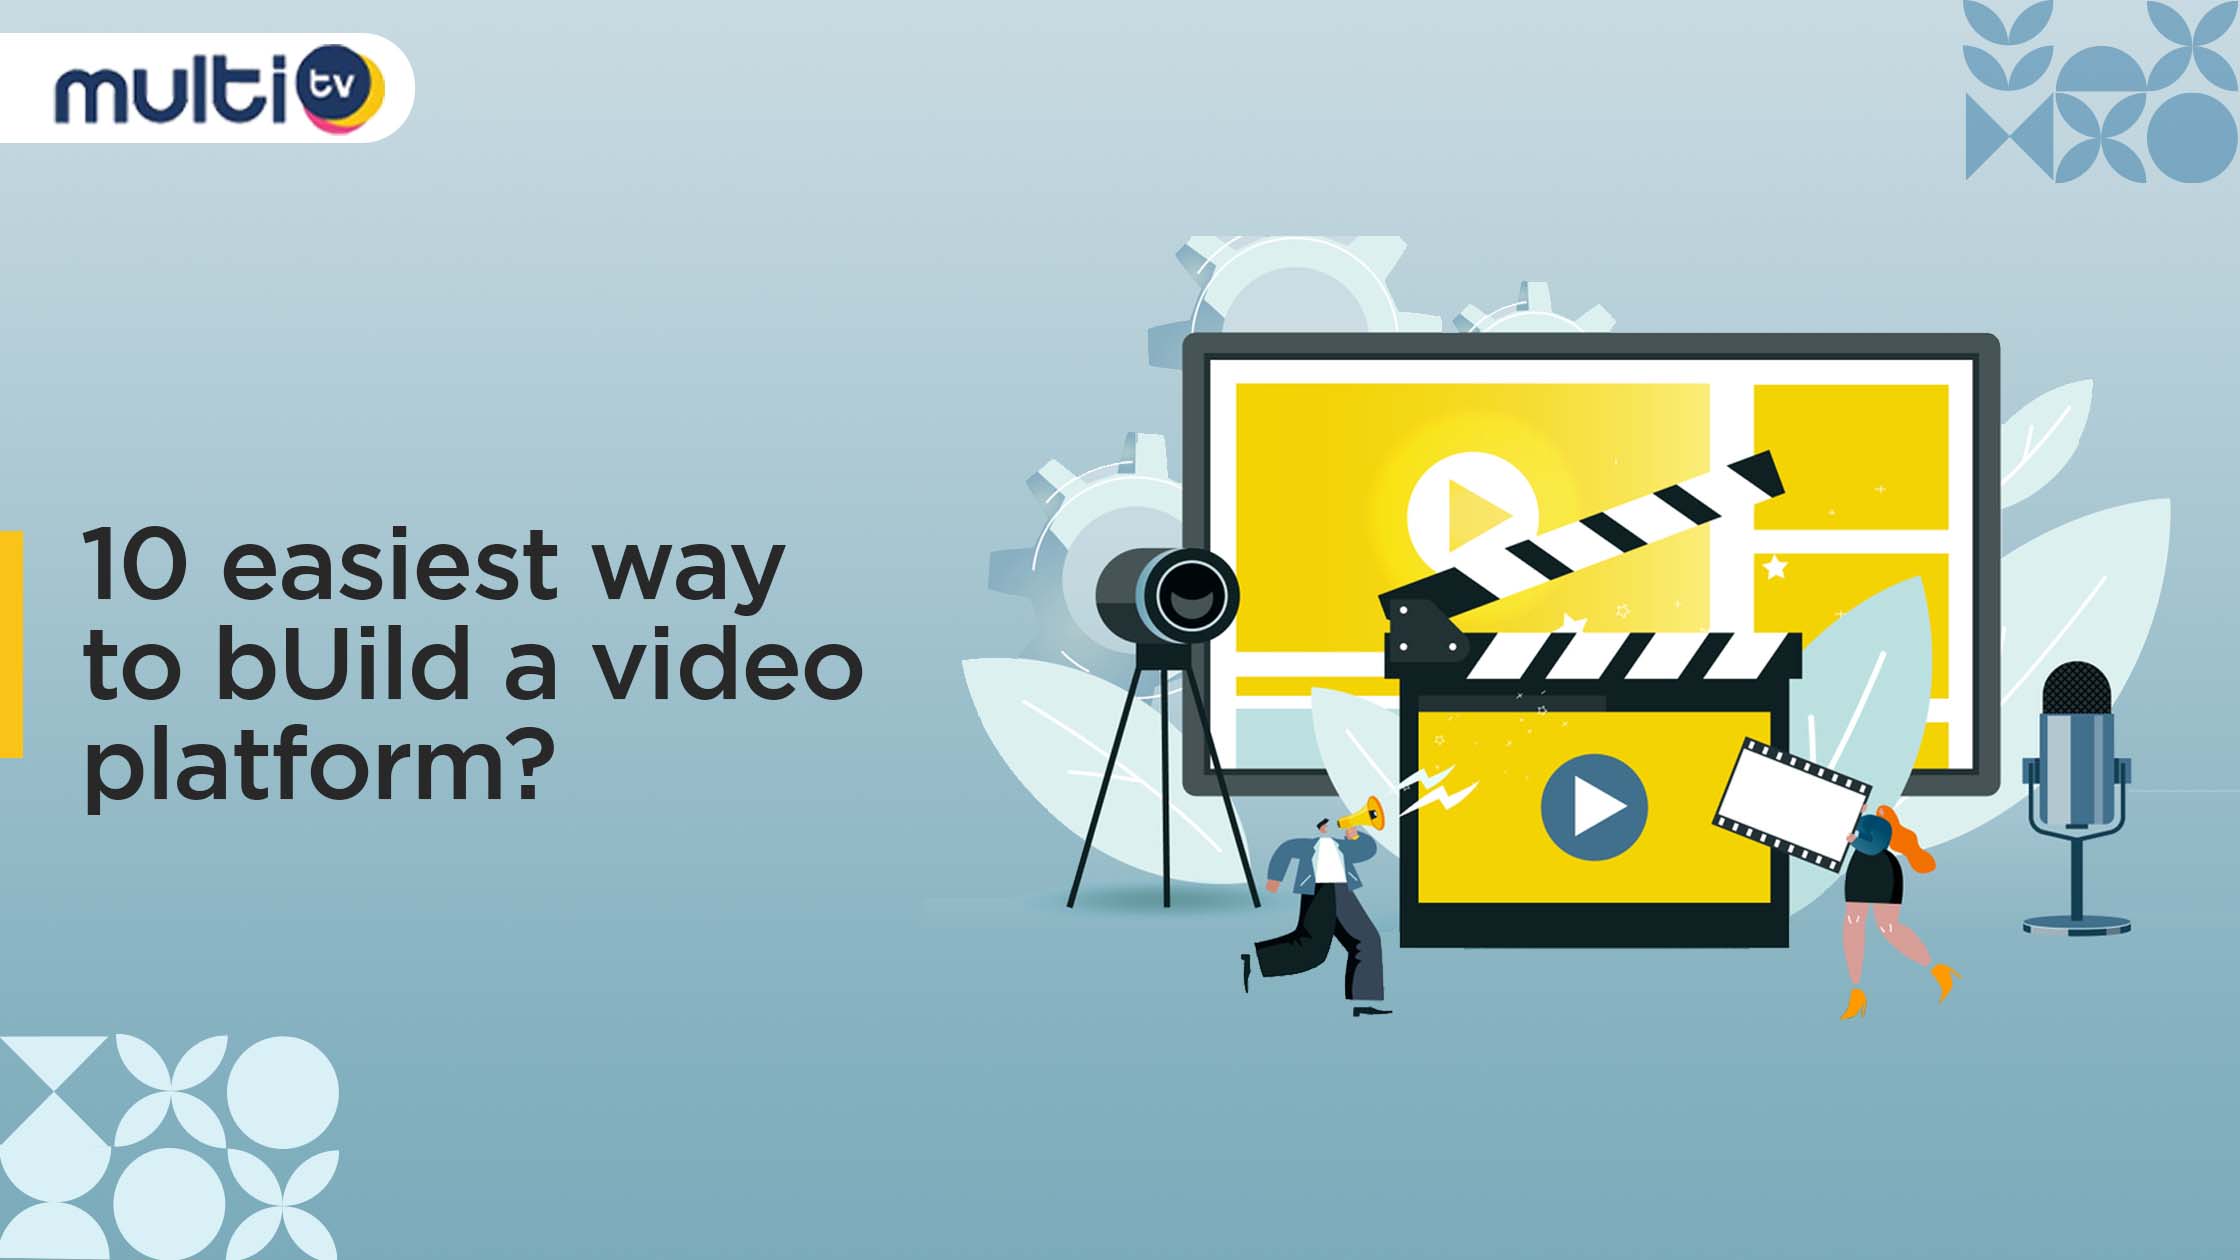 What Are The 10 Simplest Ways To Build A Video Platform?